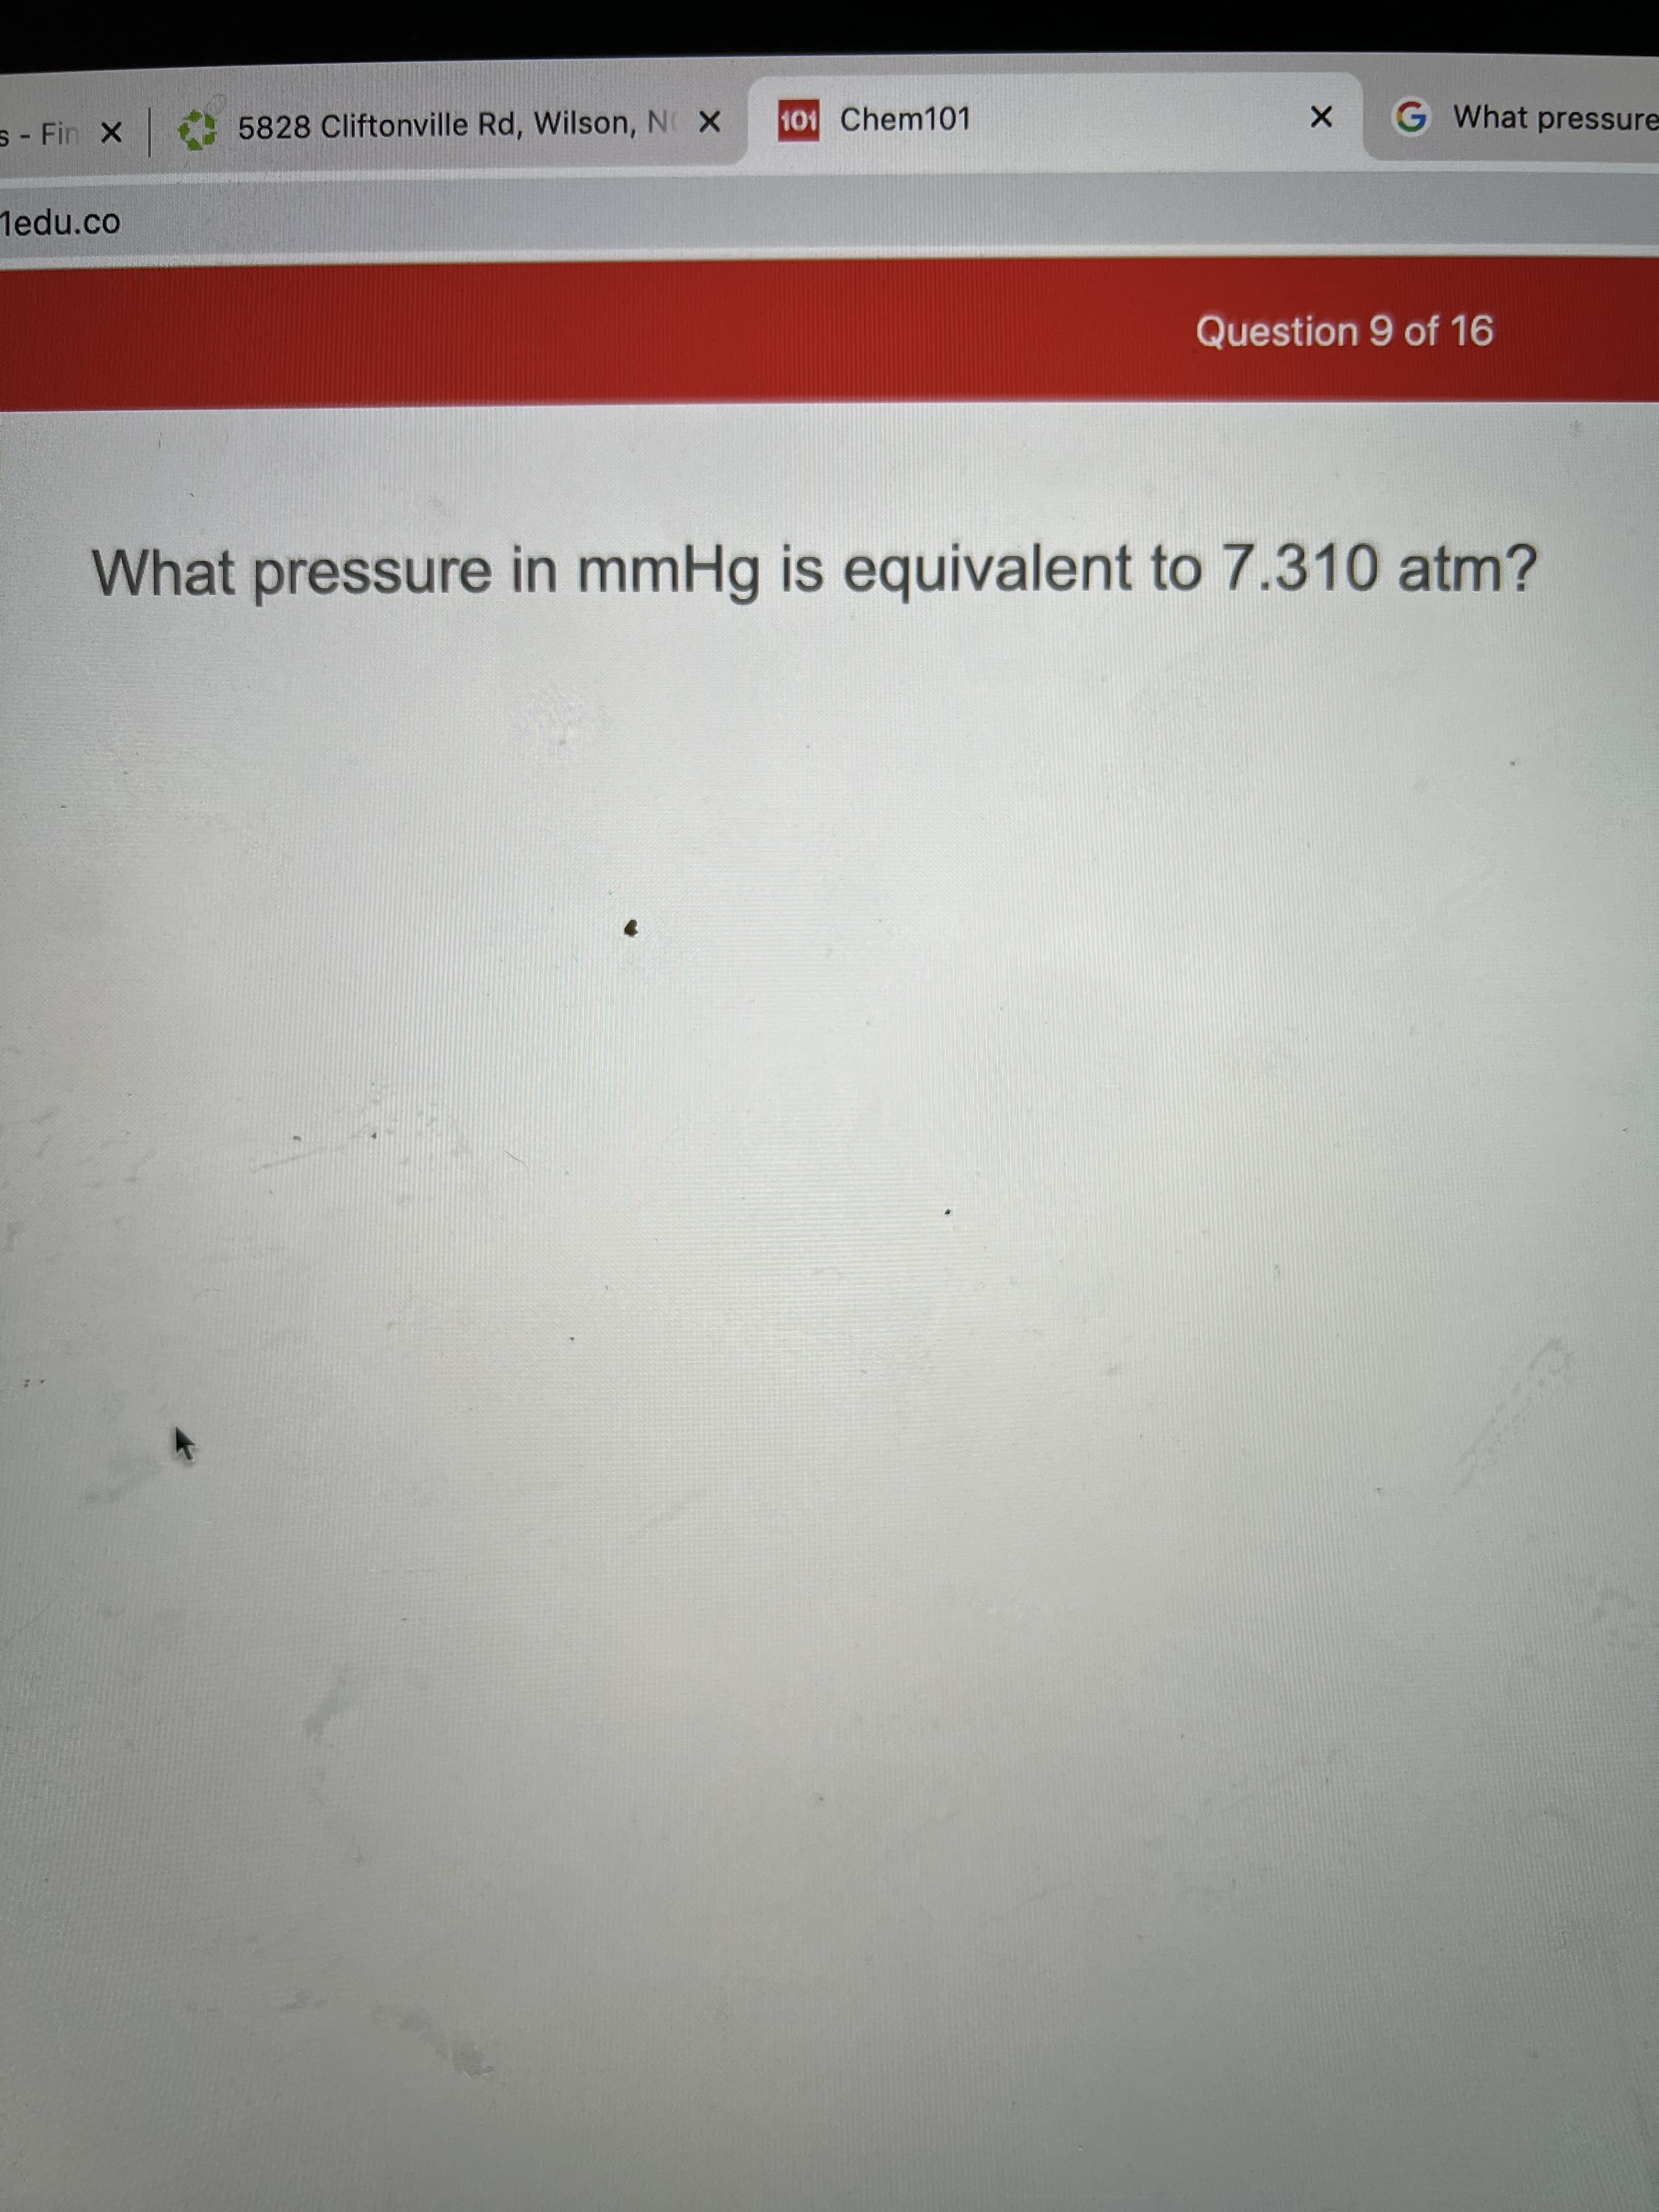 S - Fin X 5828 Cliftonville Rd, Wilson, N X
101 Chem101
G What pressure
1edu.co
Question 9 of 16
What pressure in mmHg is equivalent to 7.310 atm?
